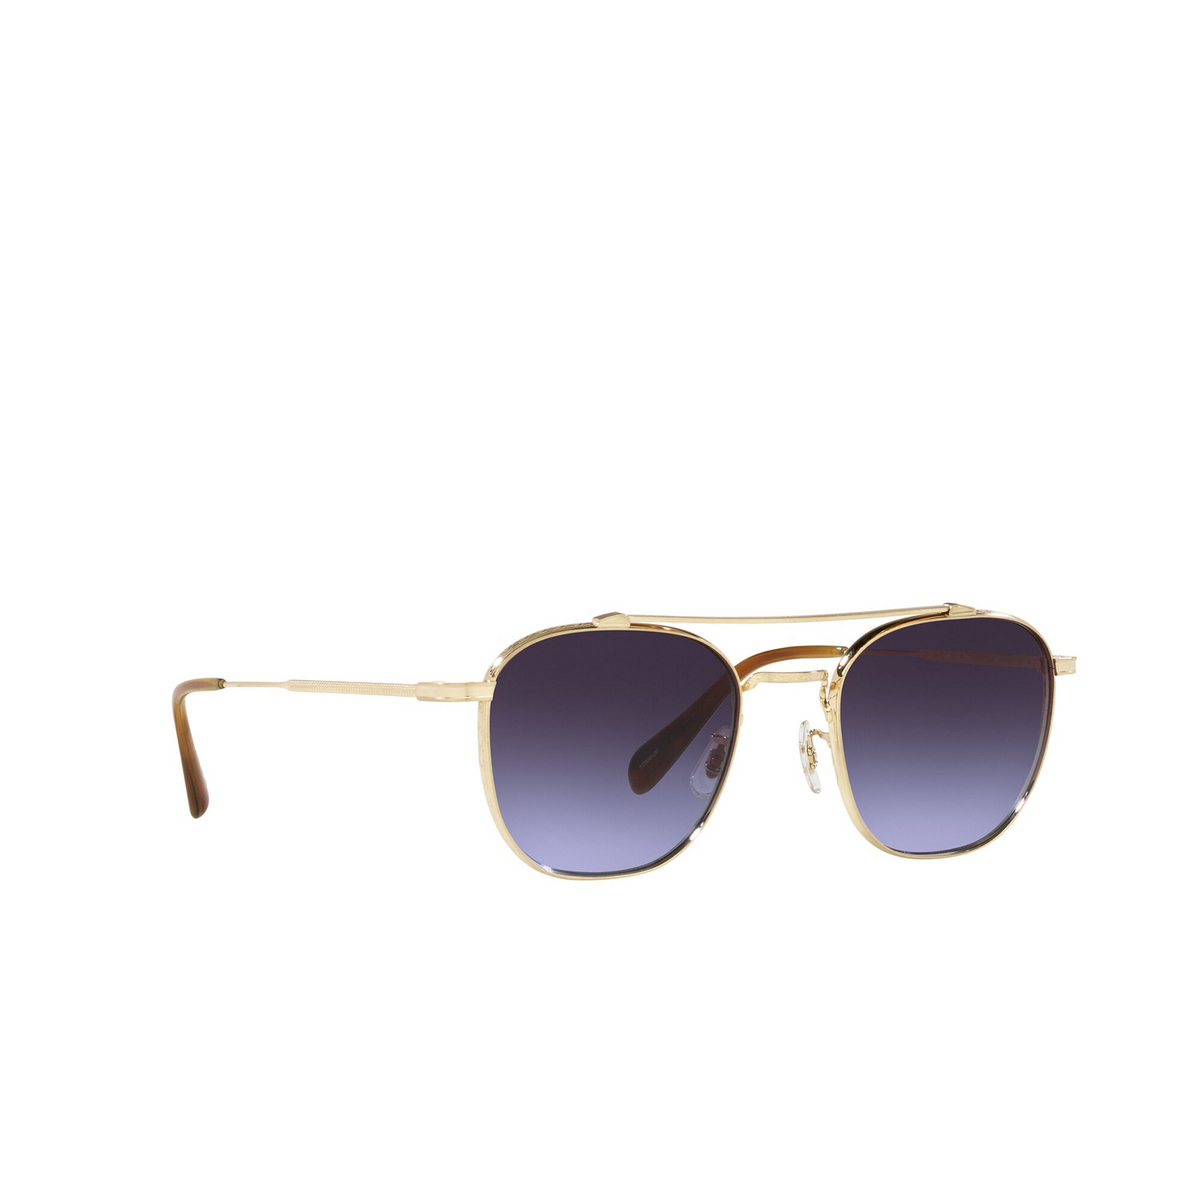 Oliver Peoples MANDEVILLE Sunglasses 531179 Brushed Gold - three-quarters view